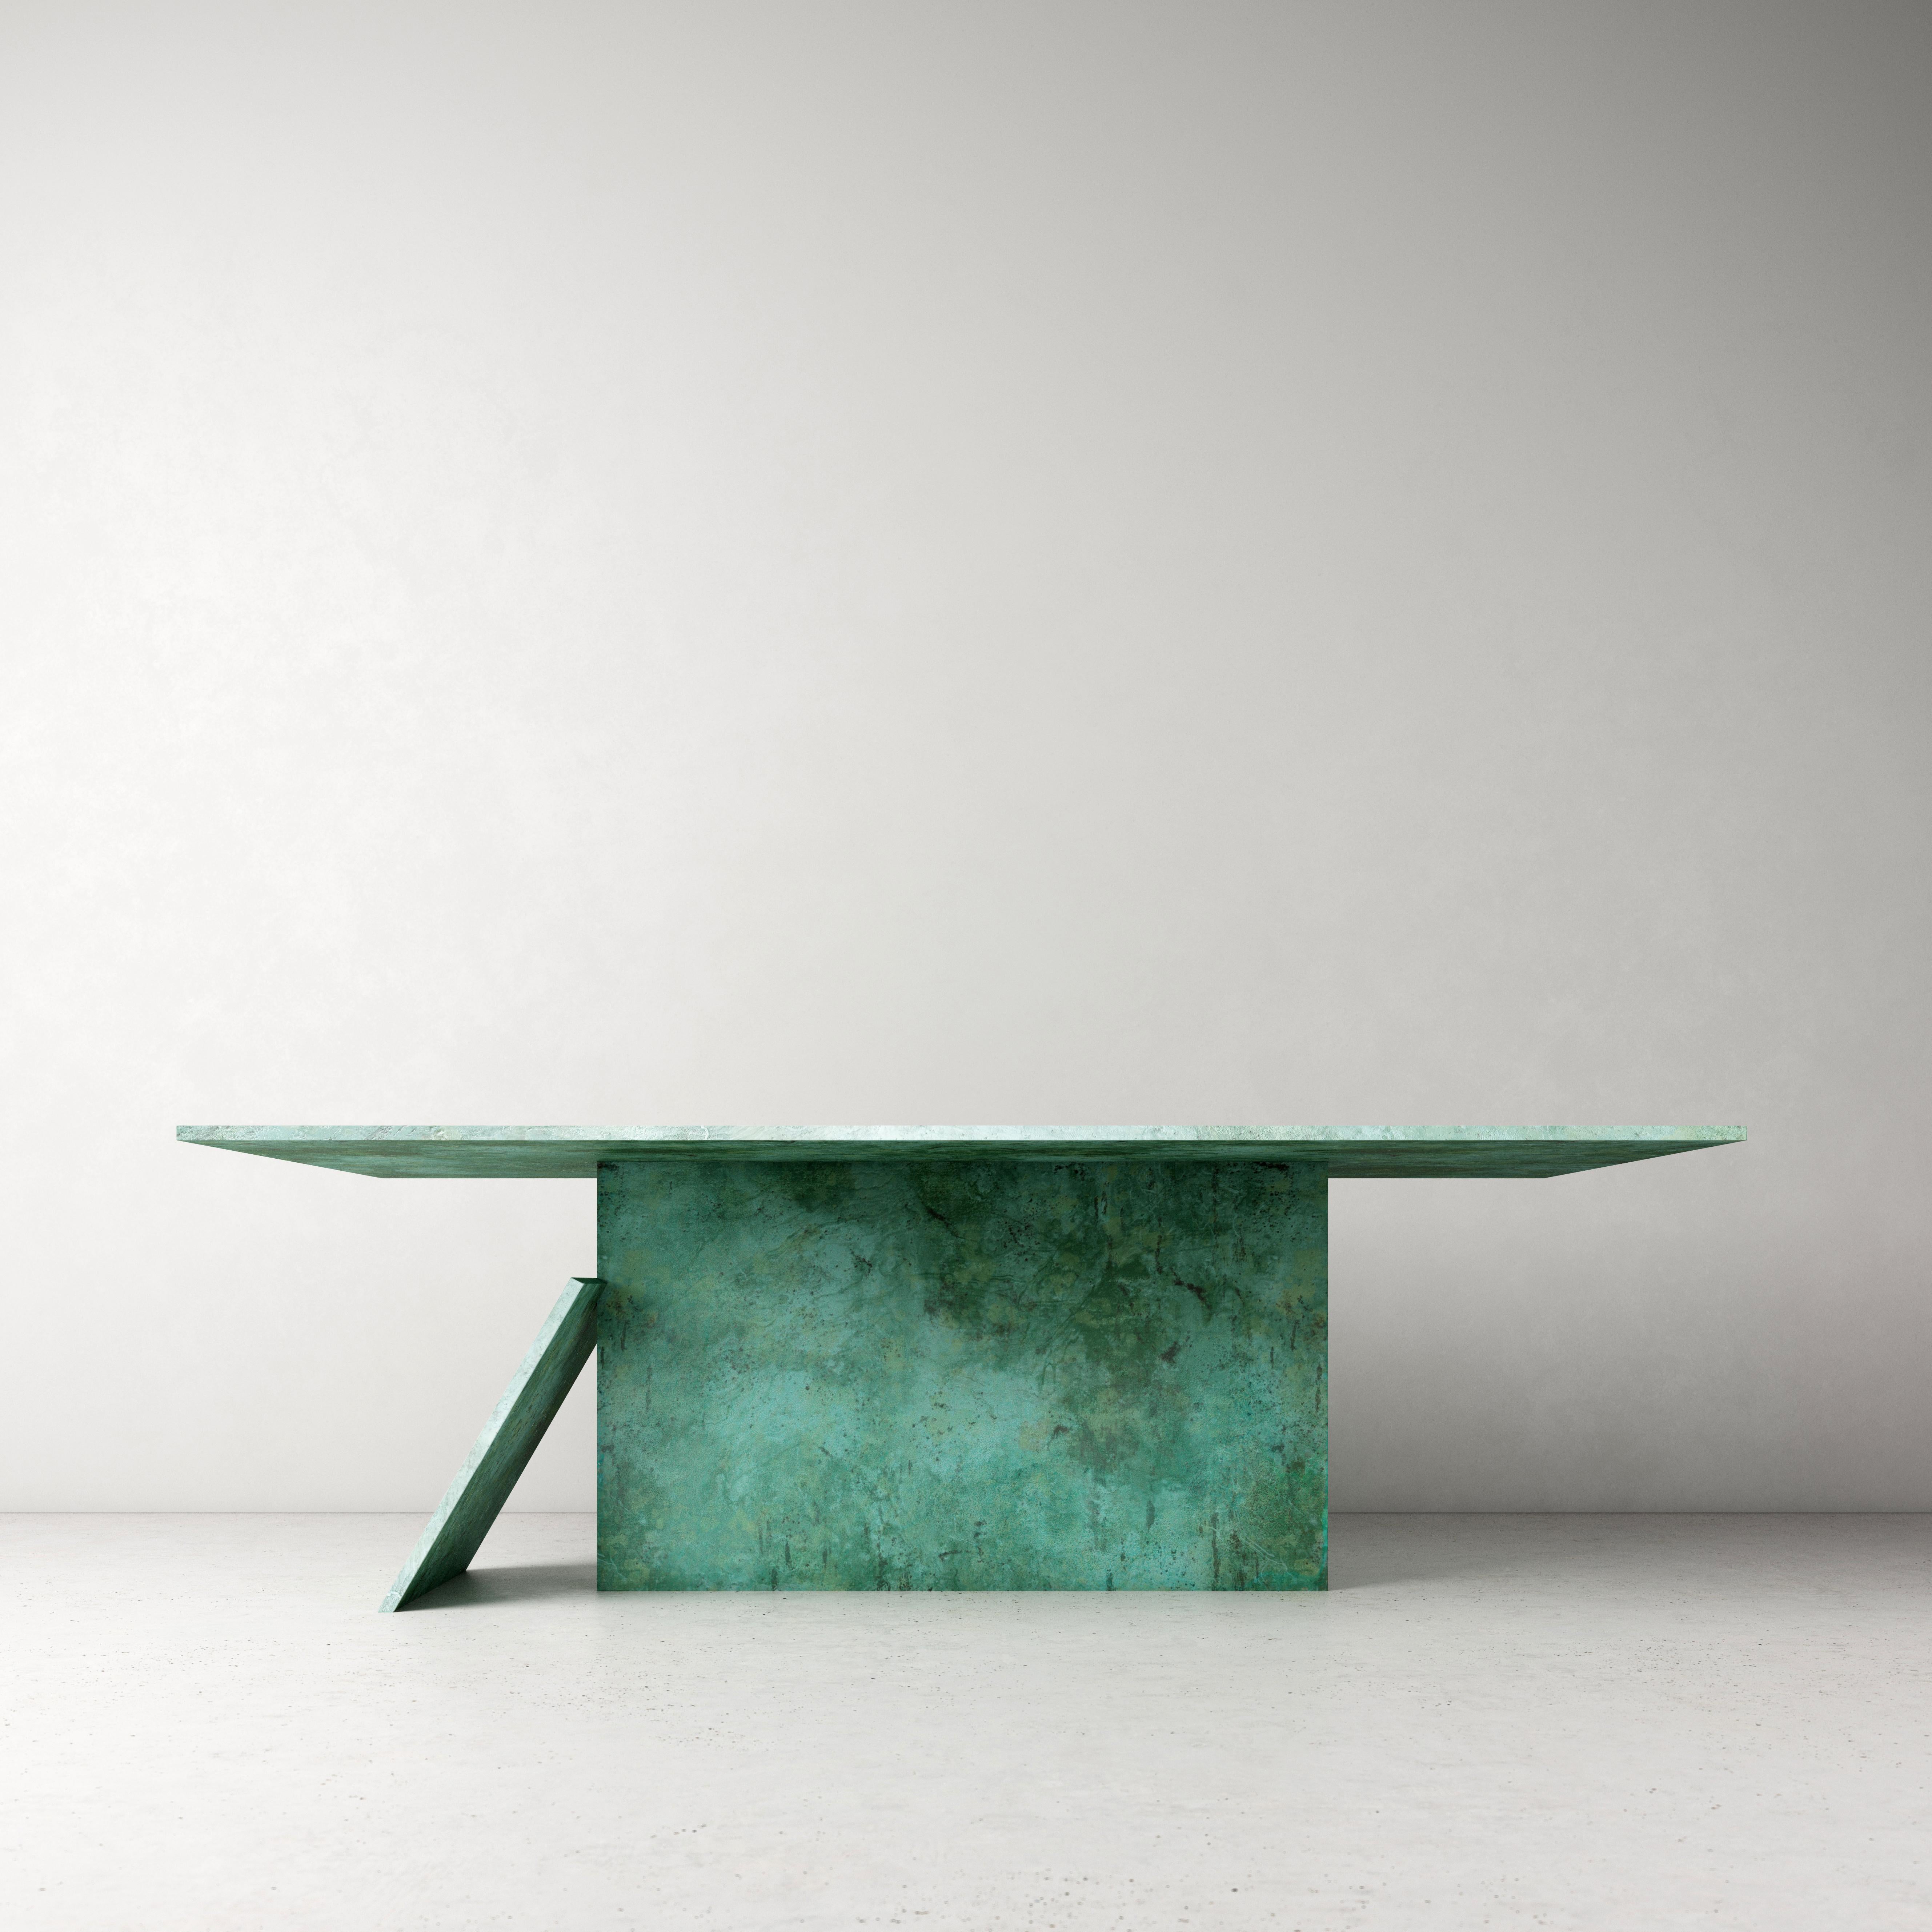 Contemporary table T by dAM Atelier
Dimensions: L 220 x W 110 x H 73
Materials: Verdigris copper
Also available in stainless steel please contact us.

dAM atelier is a duo of young Italian architects sharing the passion for design
and architecture,